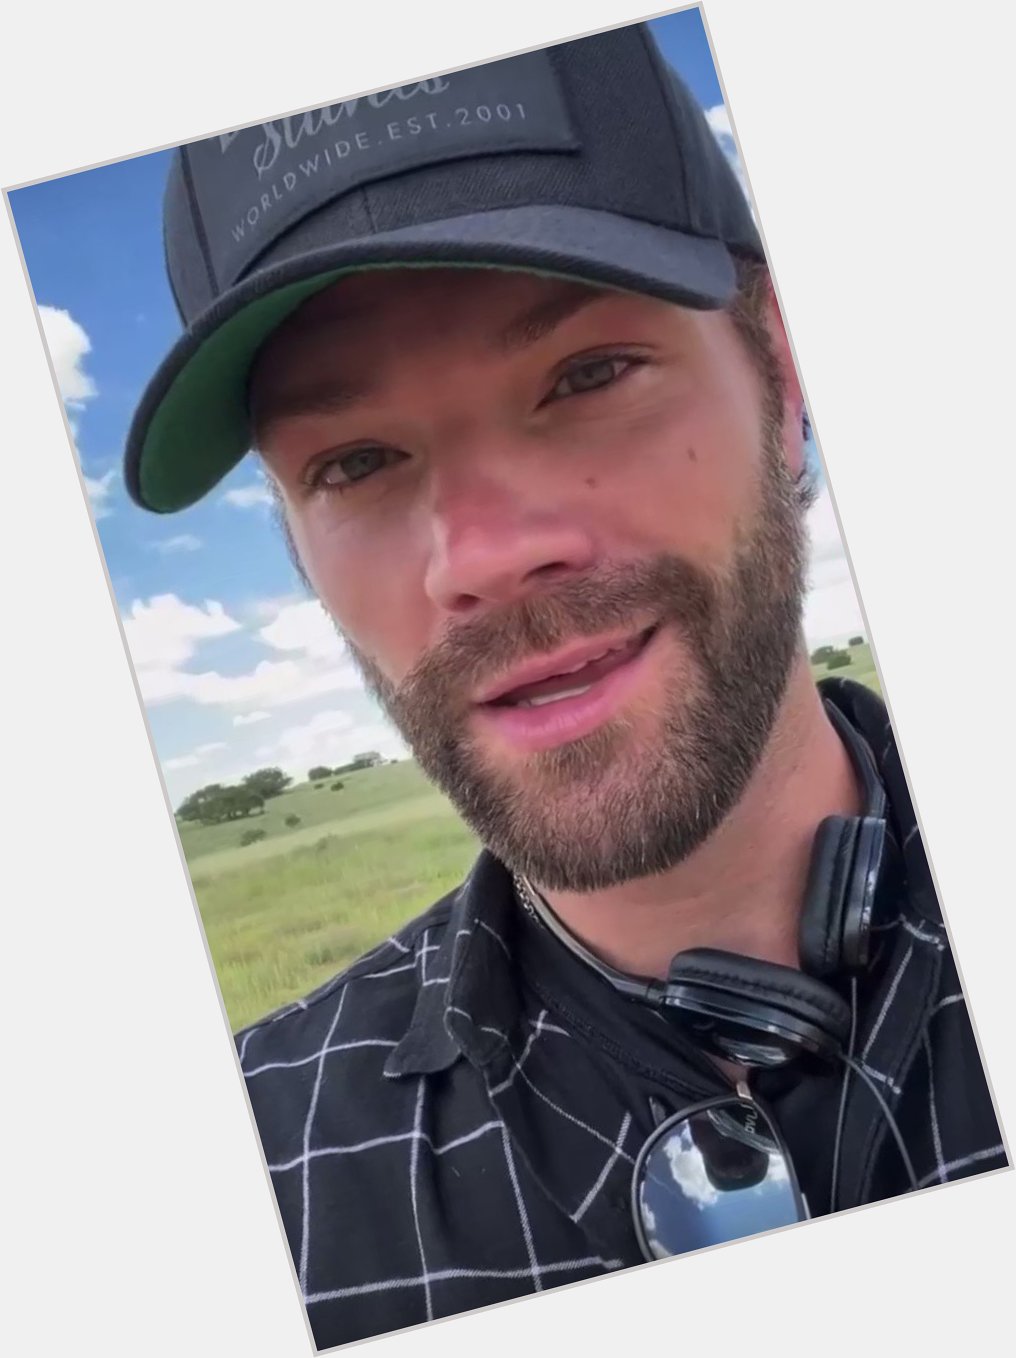 Imagine having jared padalecki sing happy birthday to you I would simply never shut up about it 